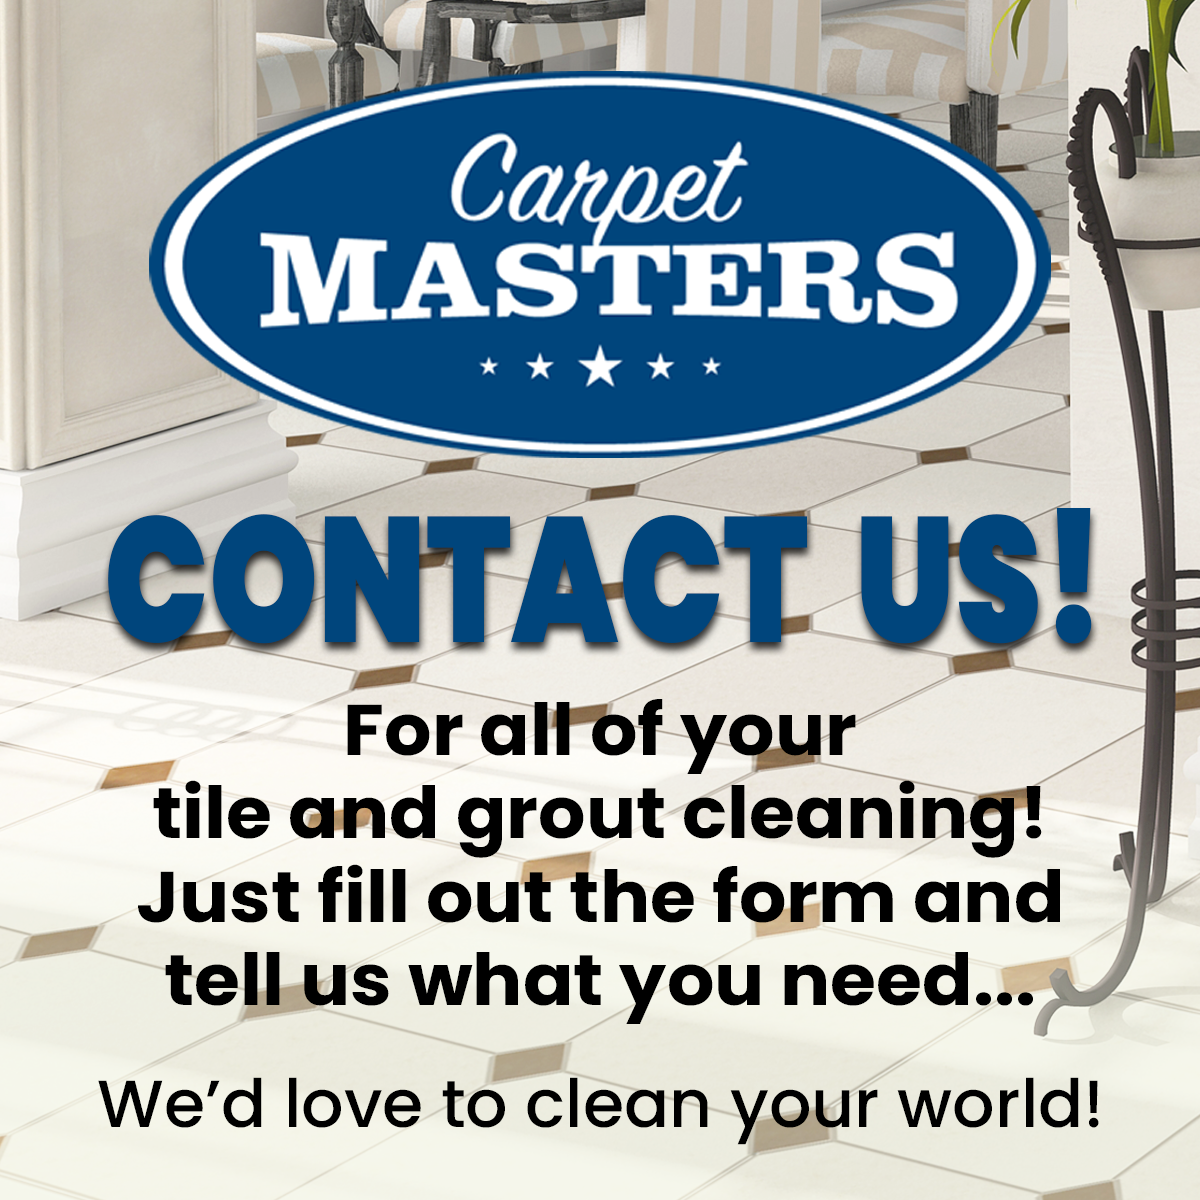 Contact Us for all of your tile and grout cleaning! Just tell us what you need...